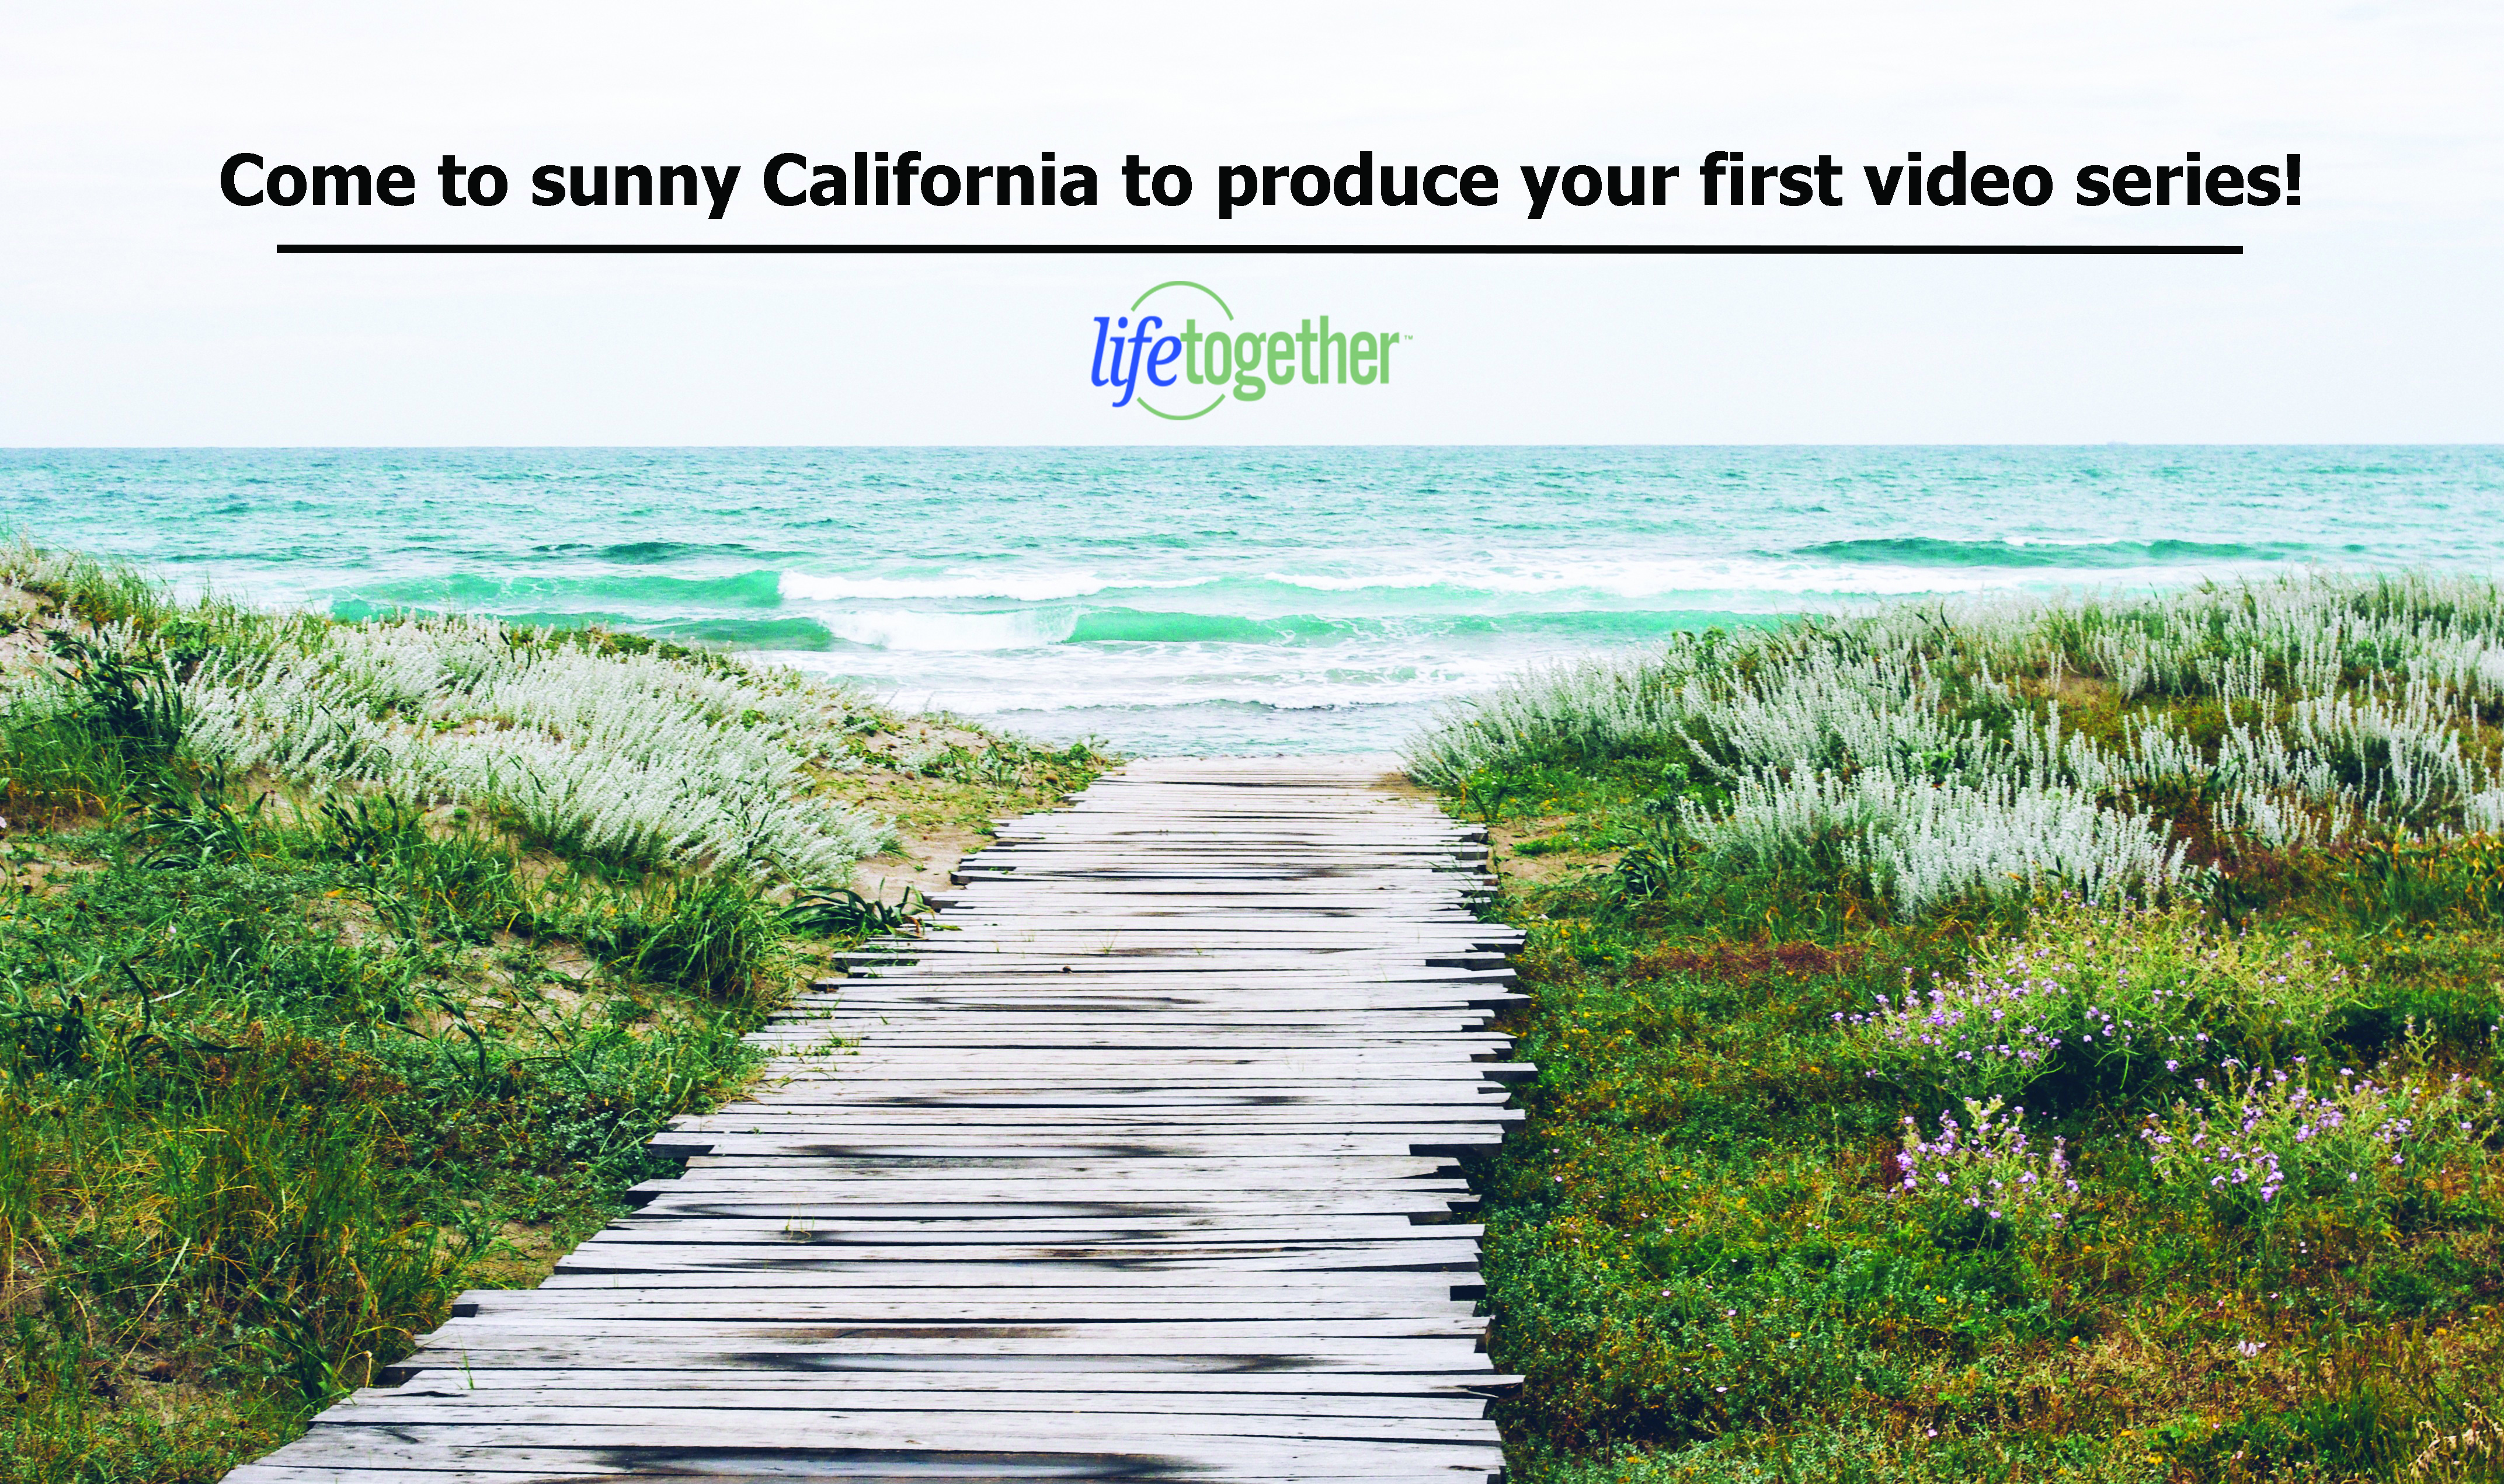 Come to sunny California to produce your first video series!